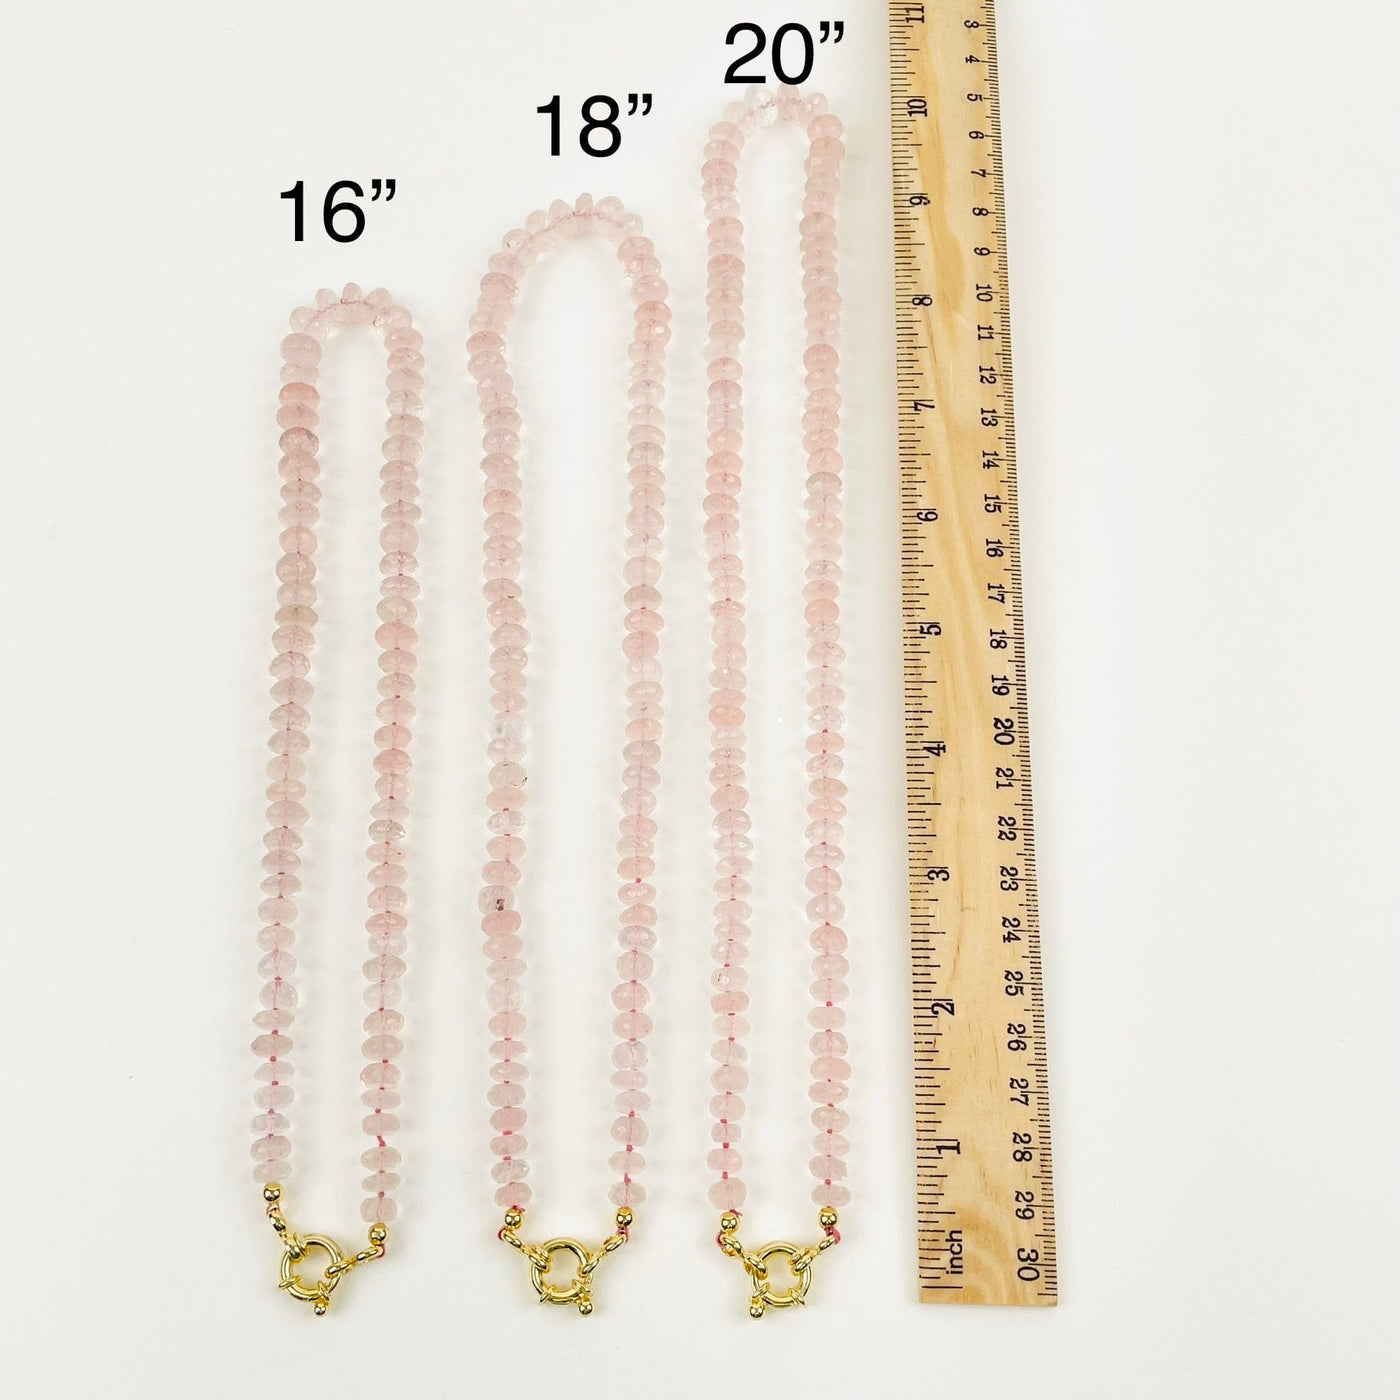 necklaces available in three sizes. 16", 18" and 20" lengths 